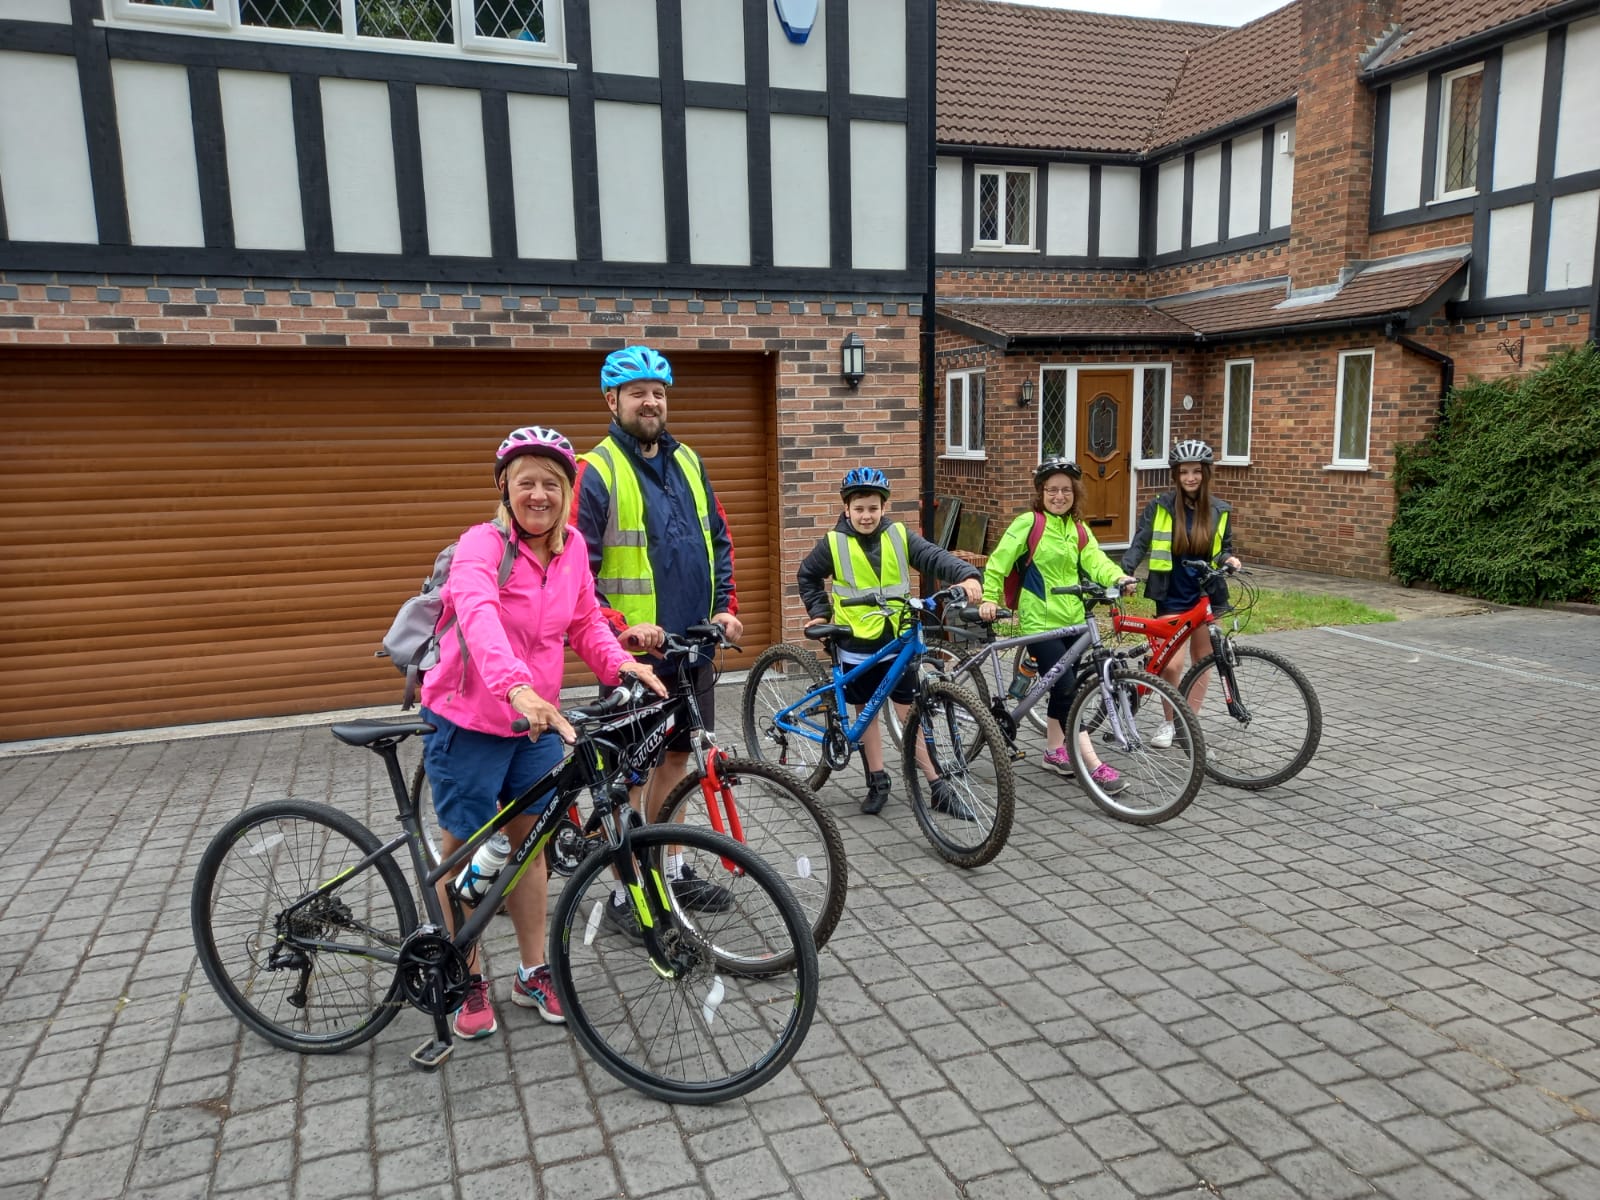 Family with their bikes ready to go out on a cycle ride